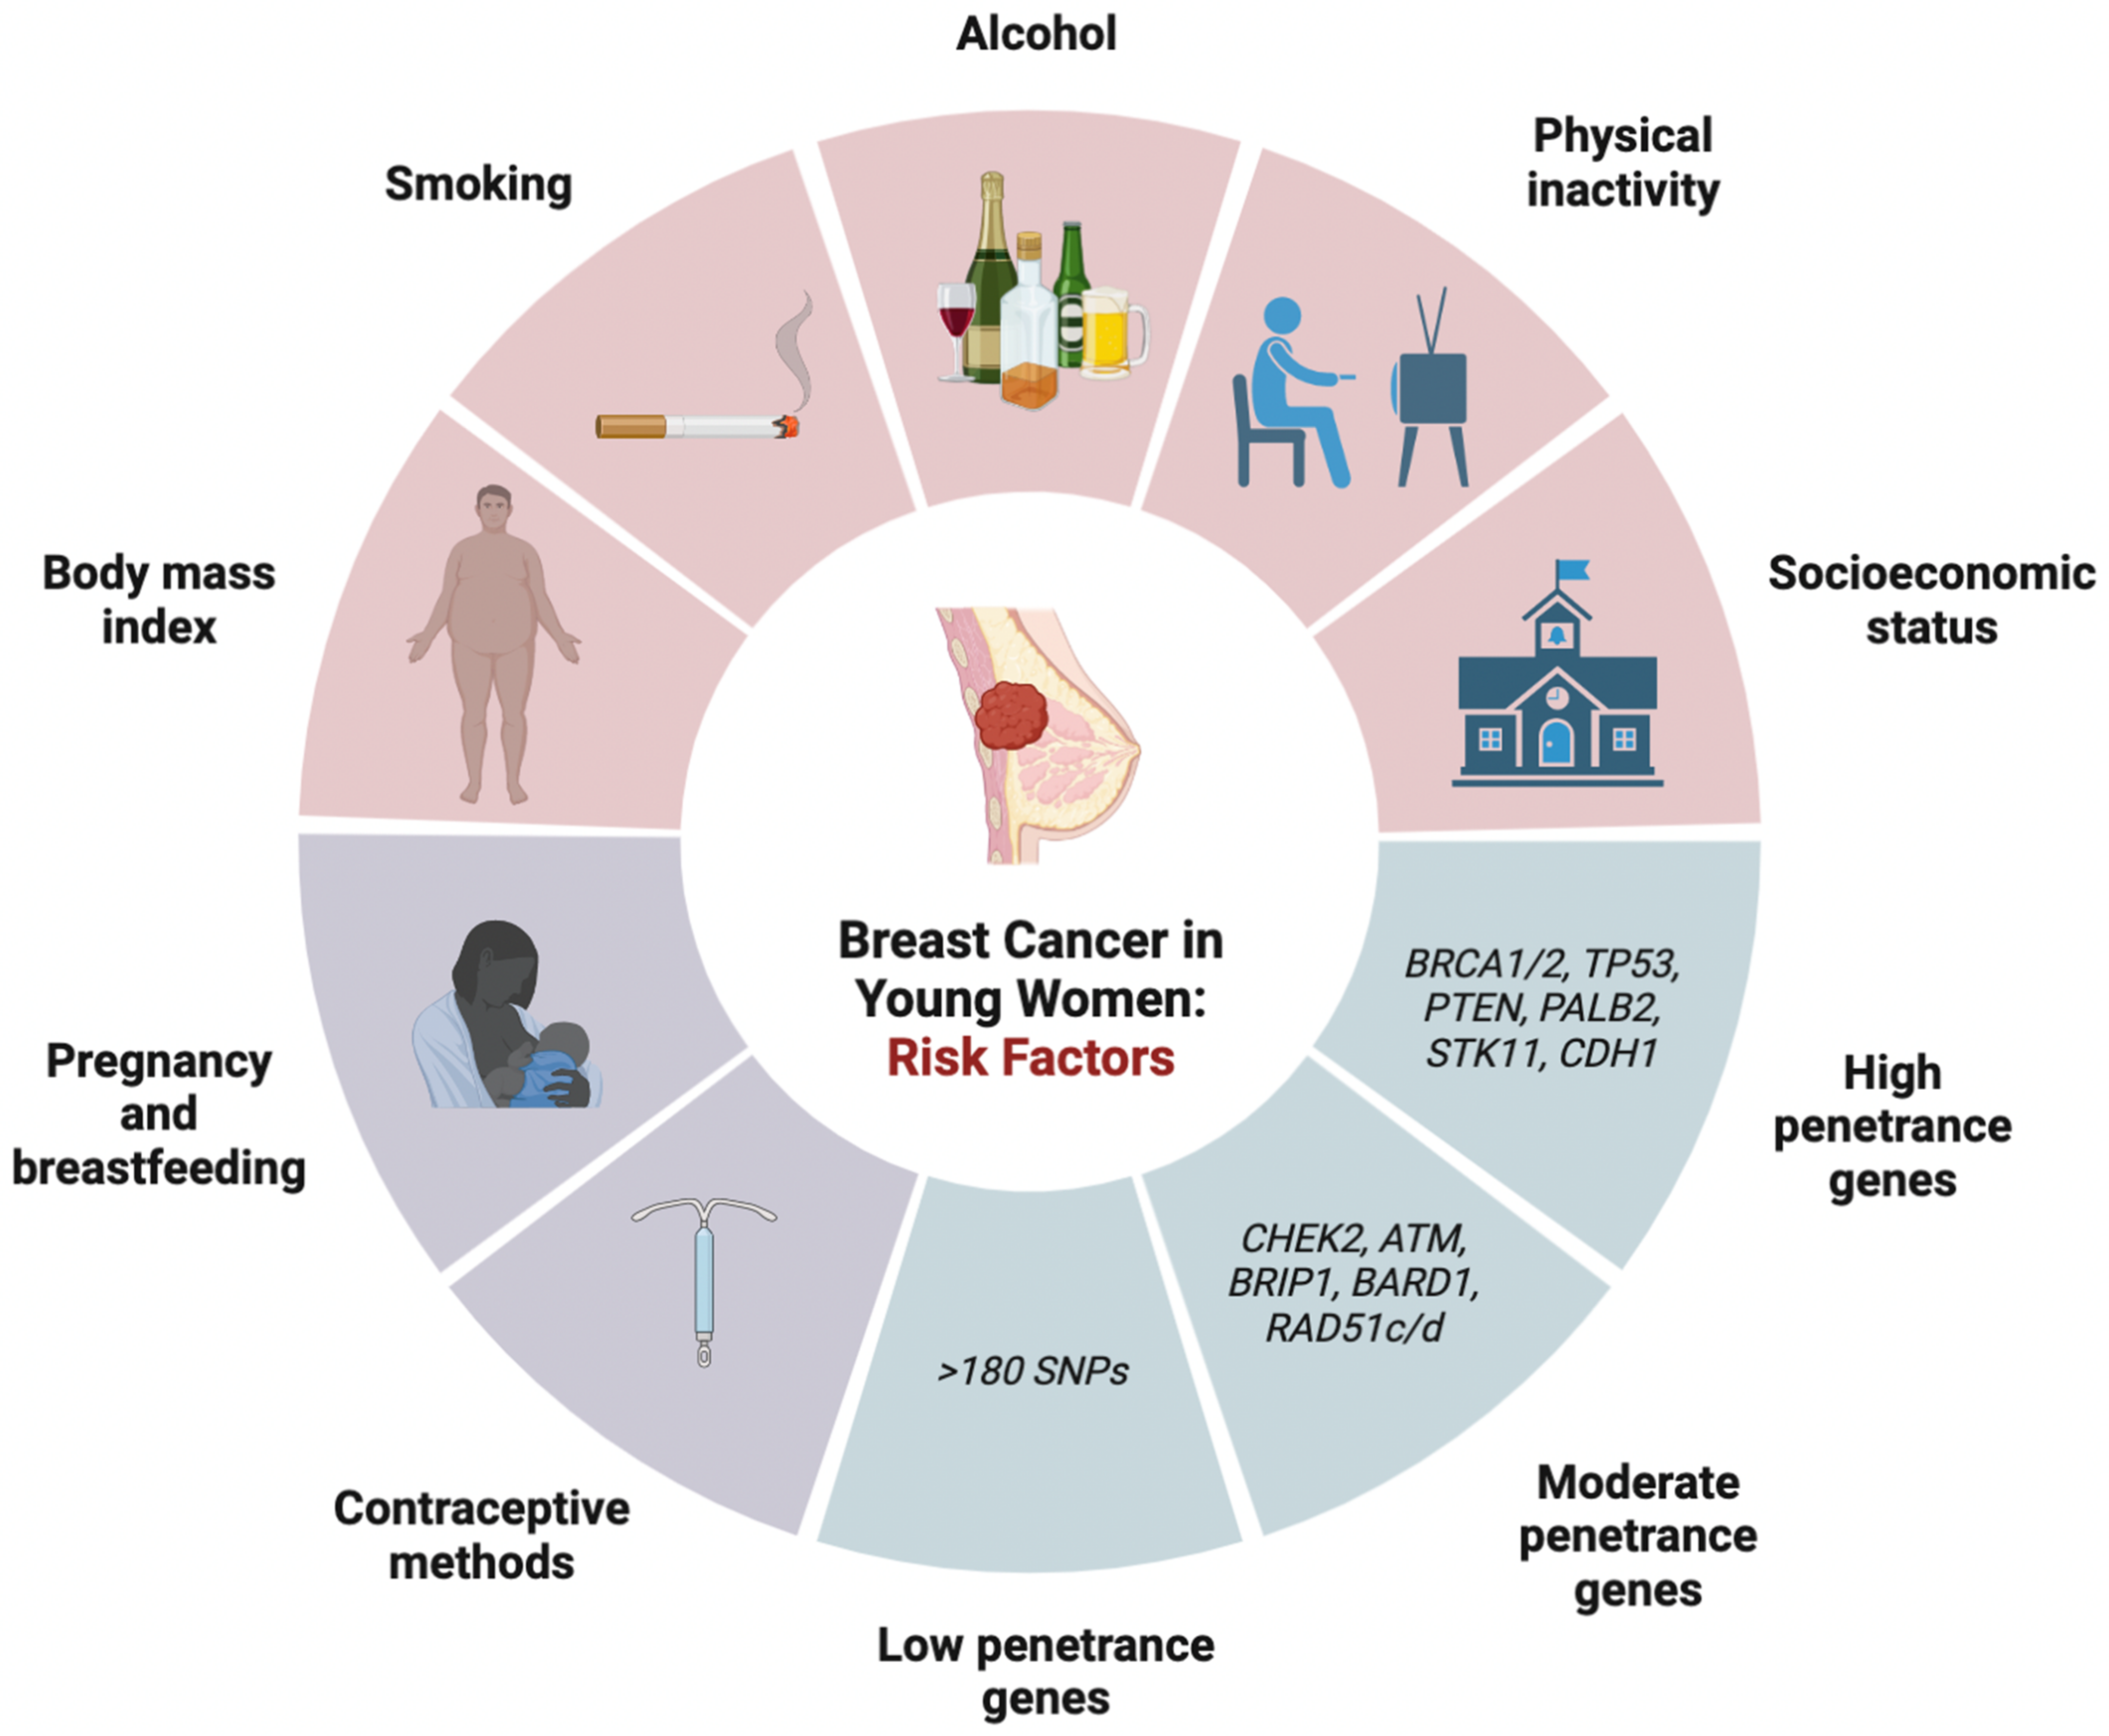 Clinical and Psychosocial Challenges of Breast Cancer in Adolescent and  Young Adult Women Under the Age of 40 Years